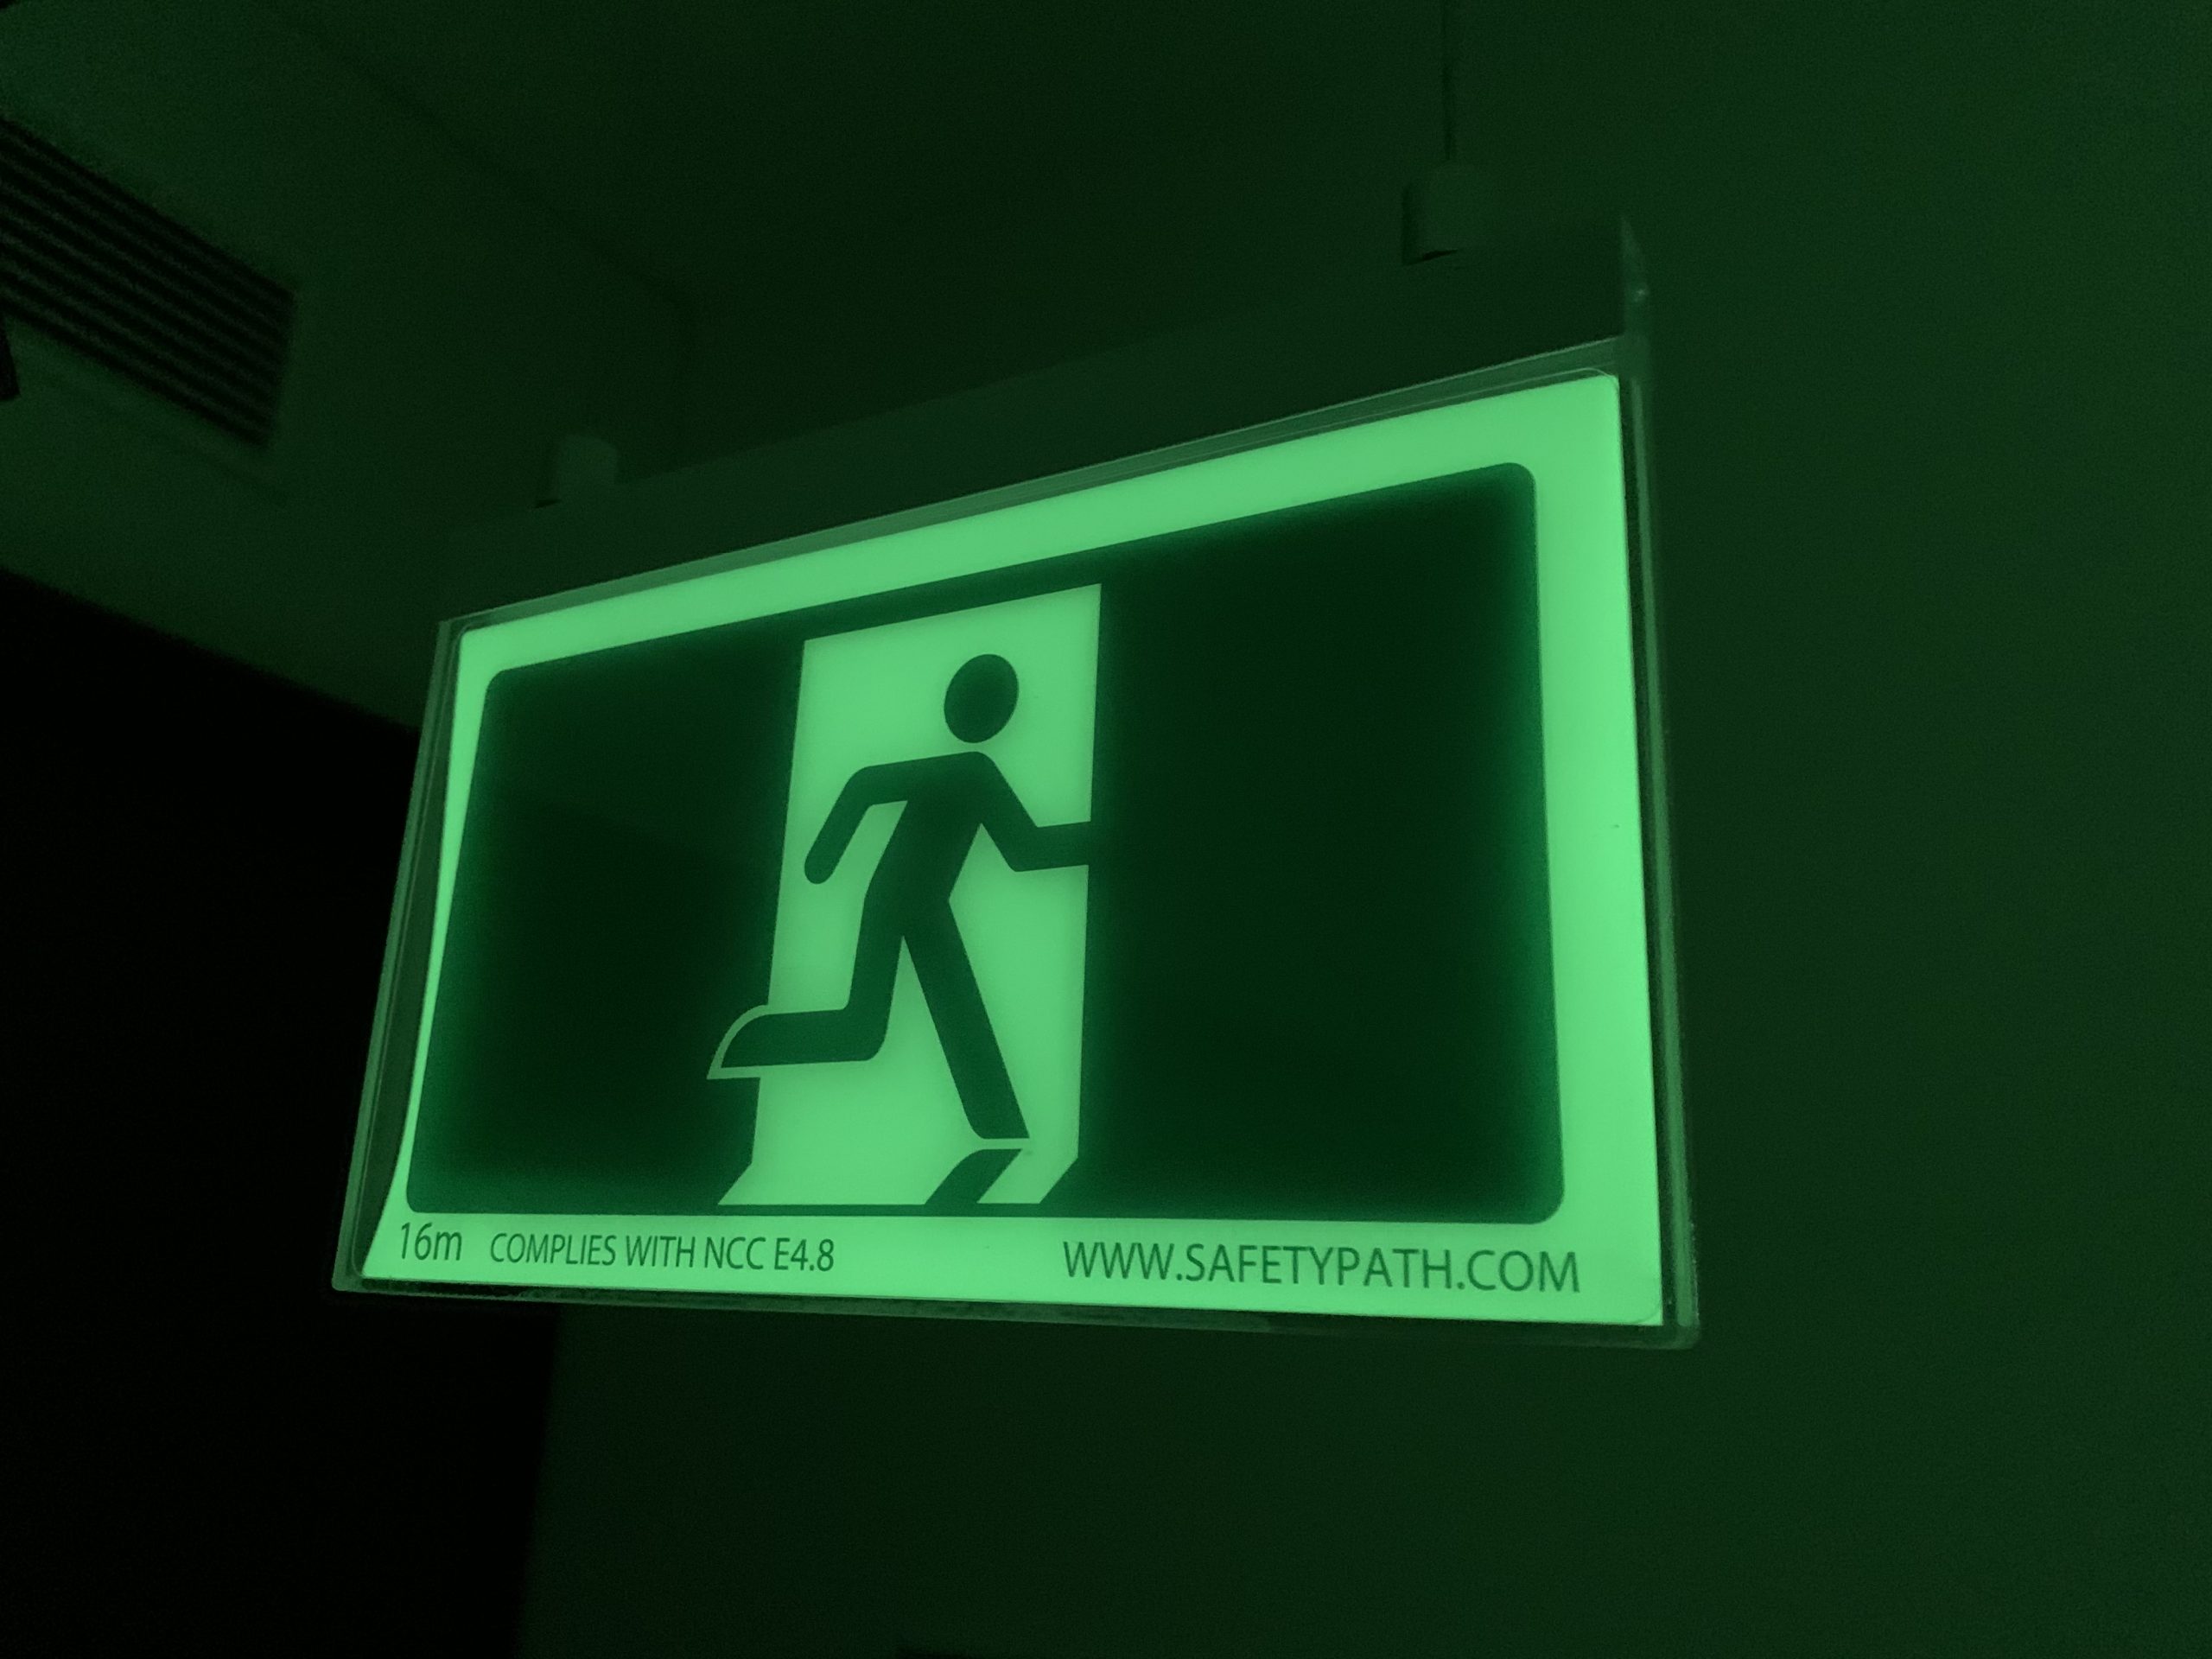 Safety path electricity free exit sign